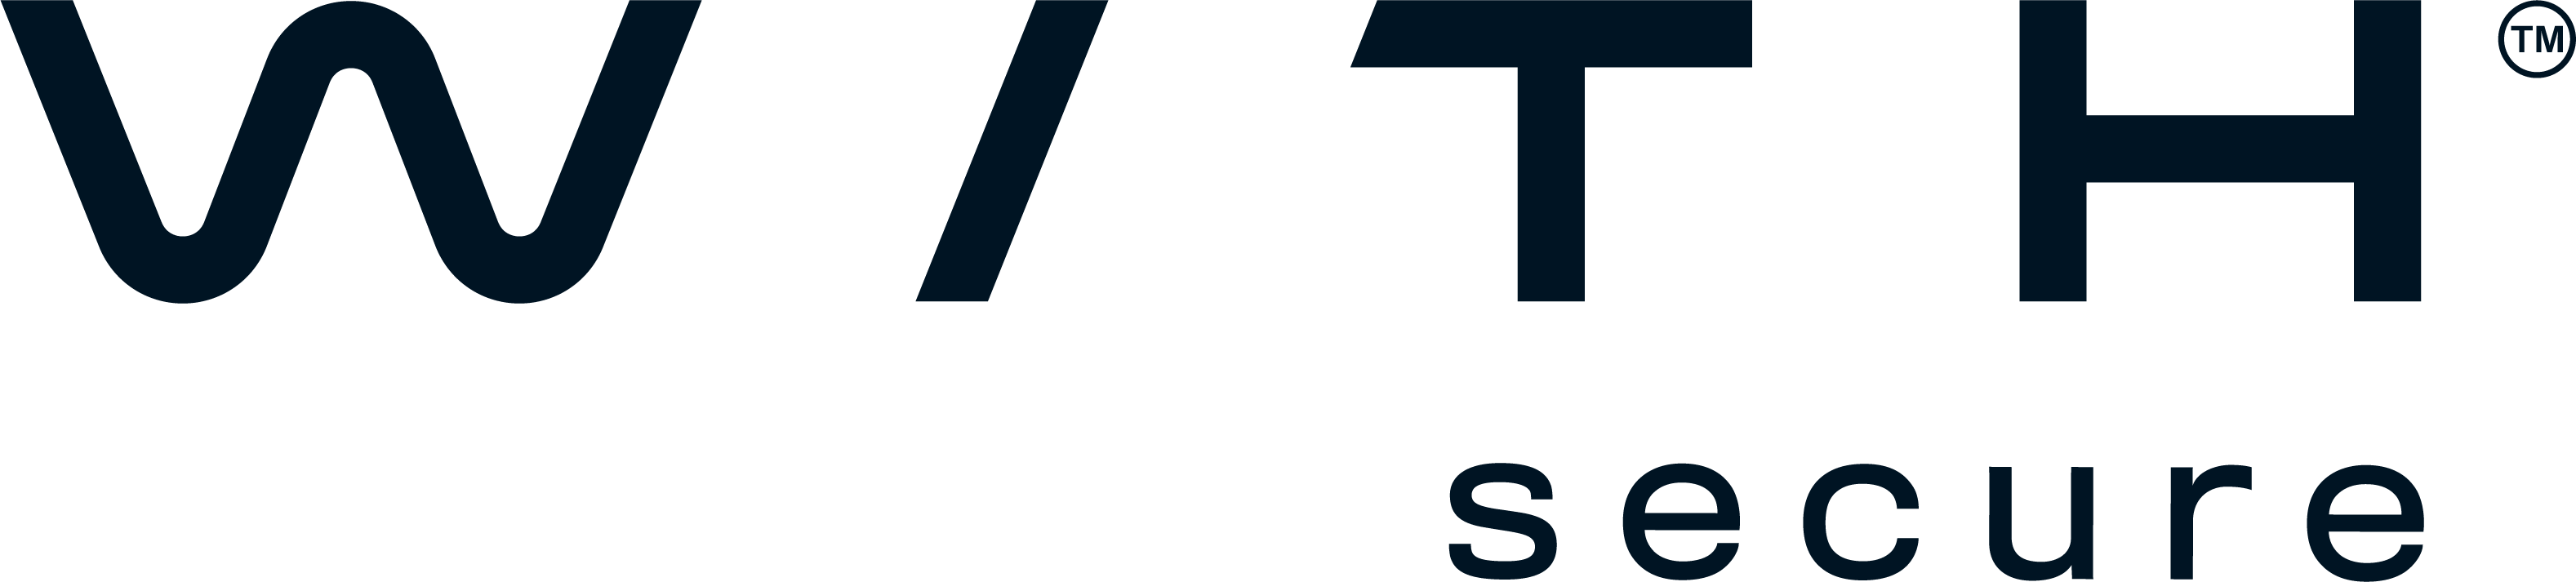 withsecure logo